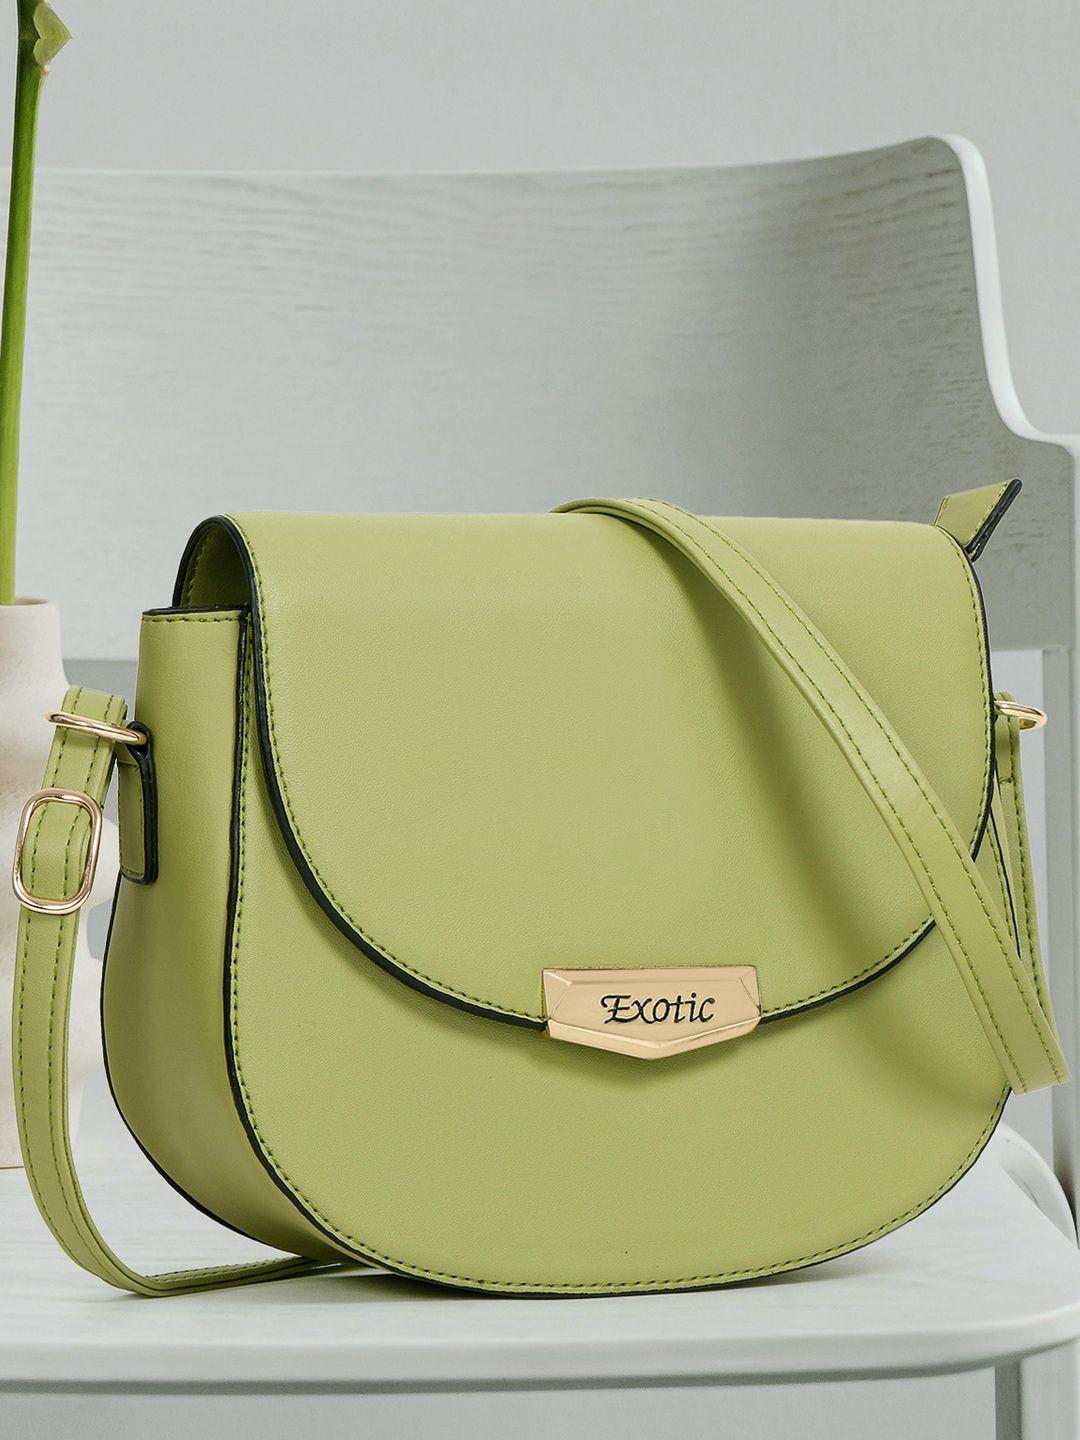 exotic lime green pu structured handheld bag with tasselled